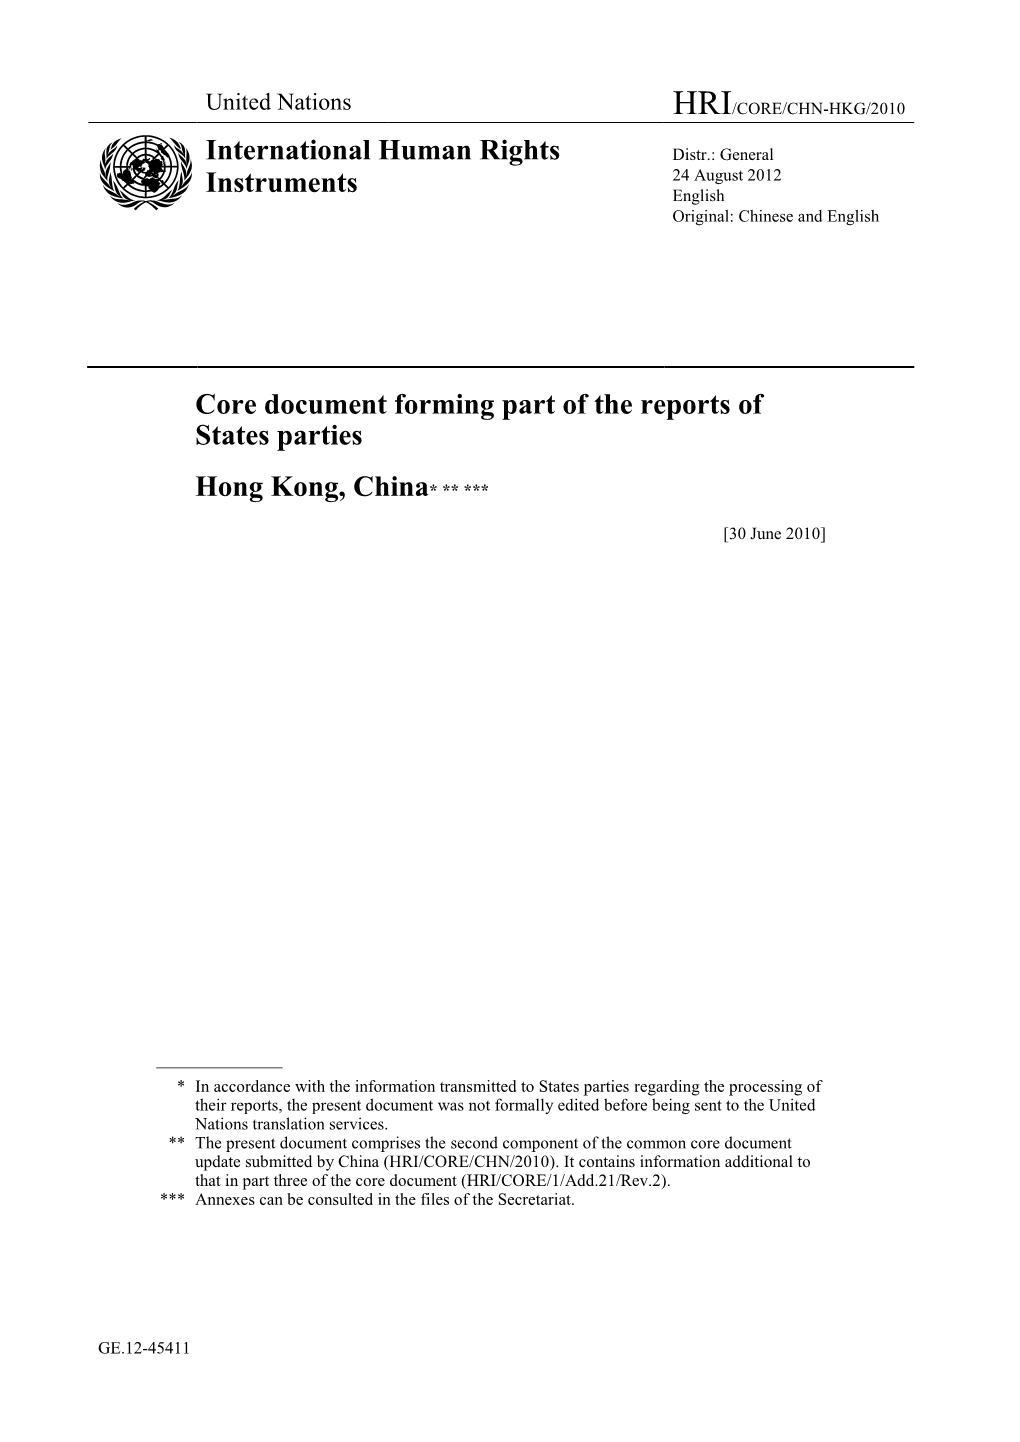 Core Document Forming Part of the Reports of States Parties Hong Kong